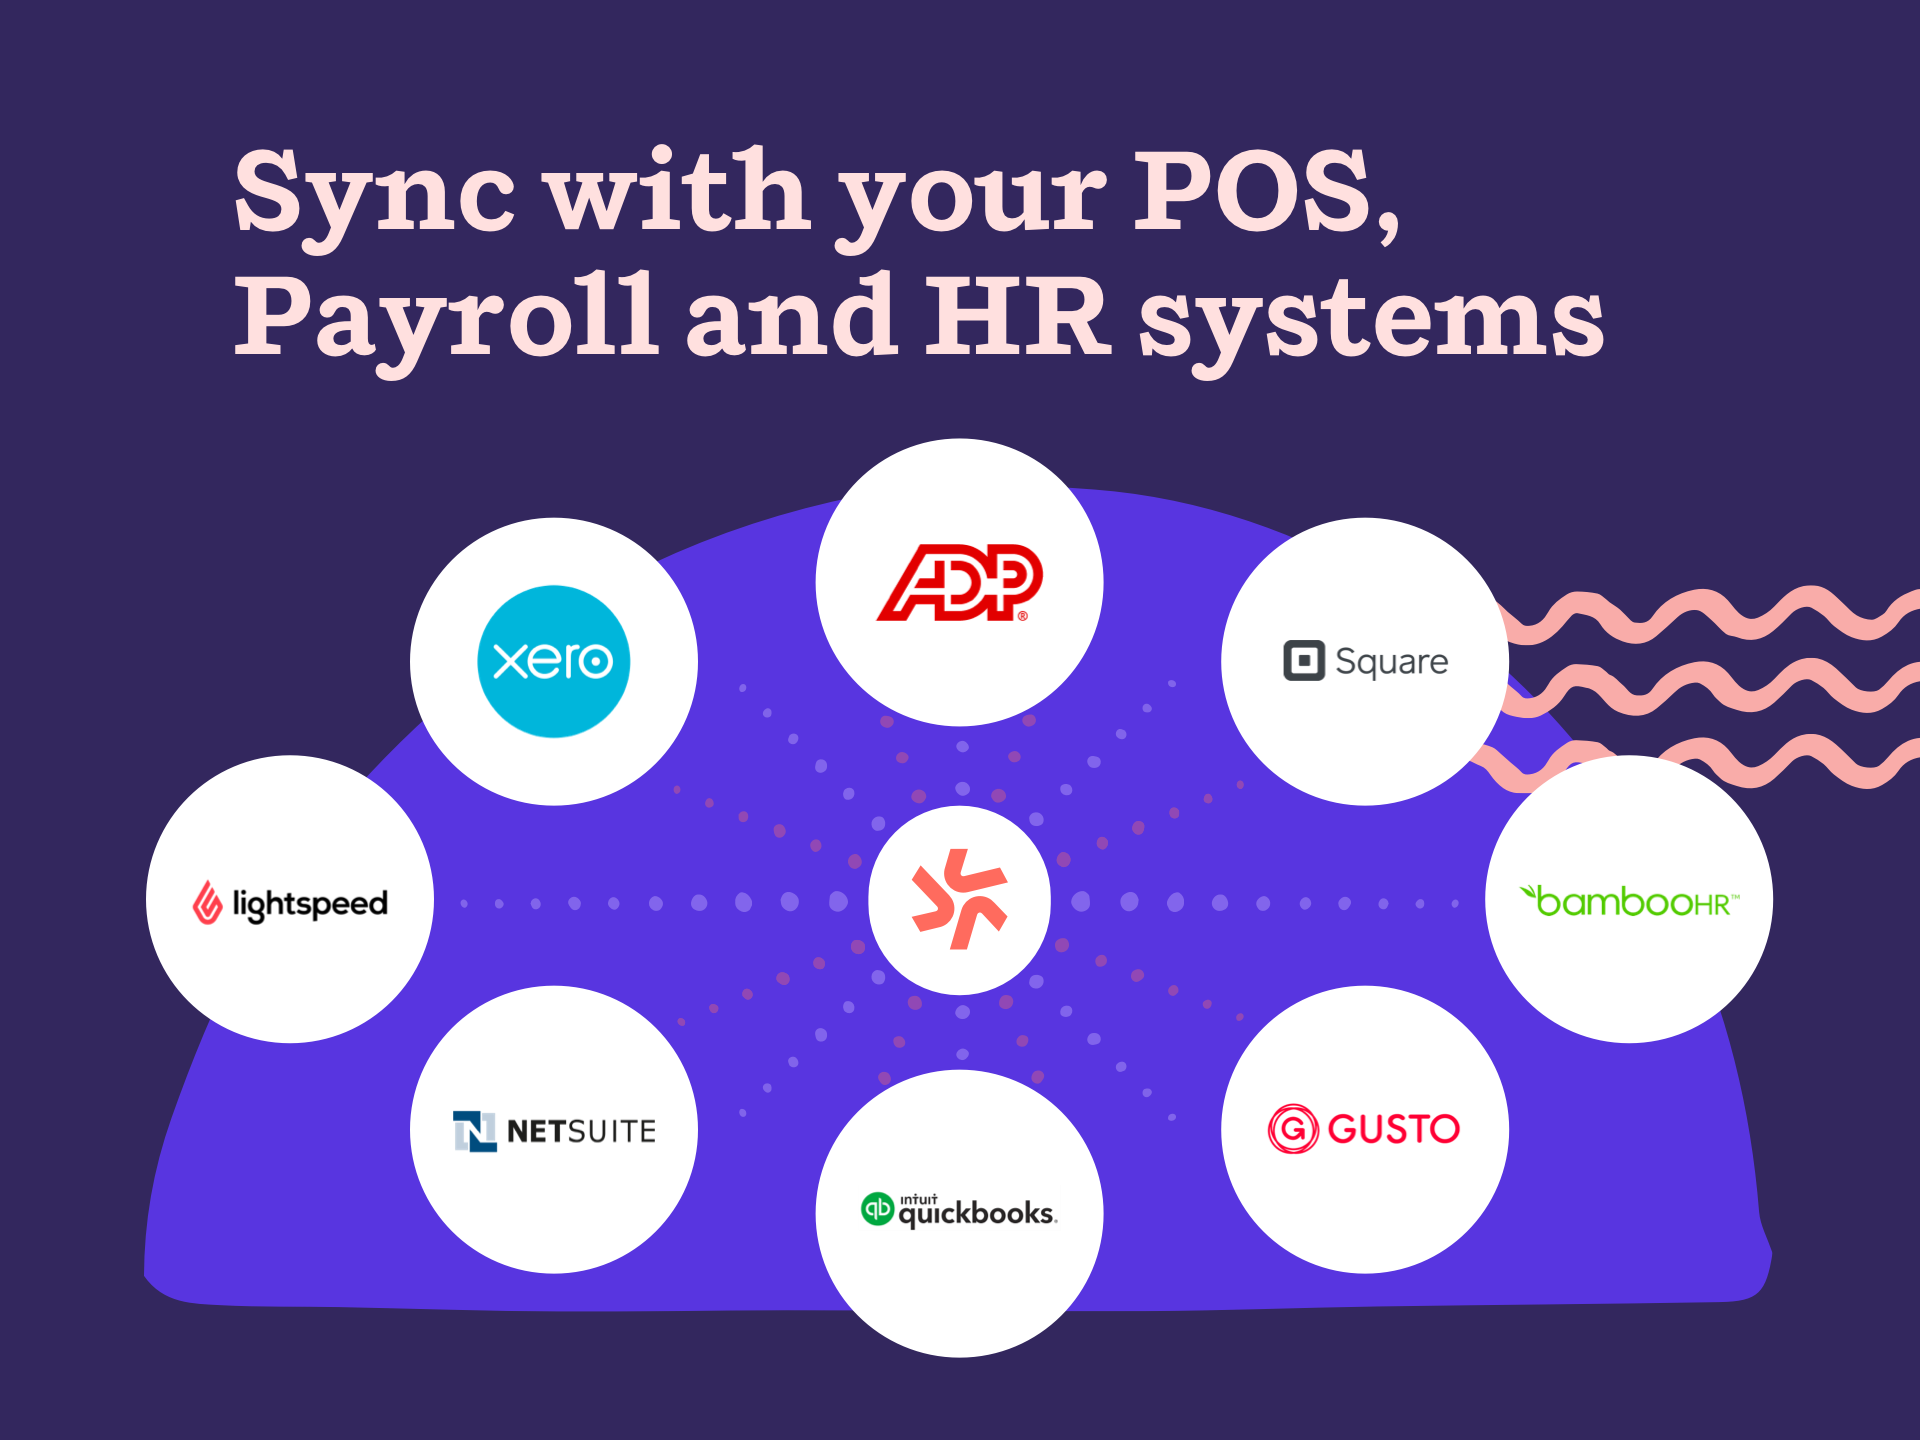 Deputy Software - Build a connected business: Deputy integrates with your Point of Sale, HR & Payroll Providers.